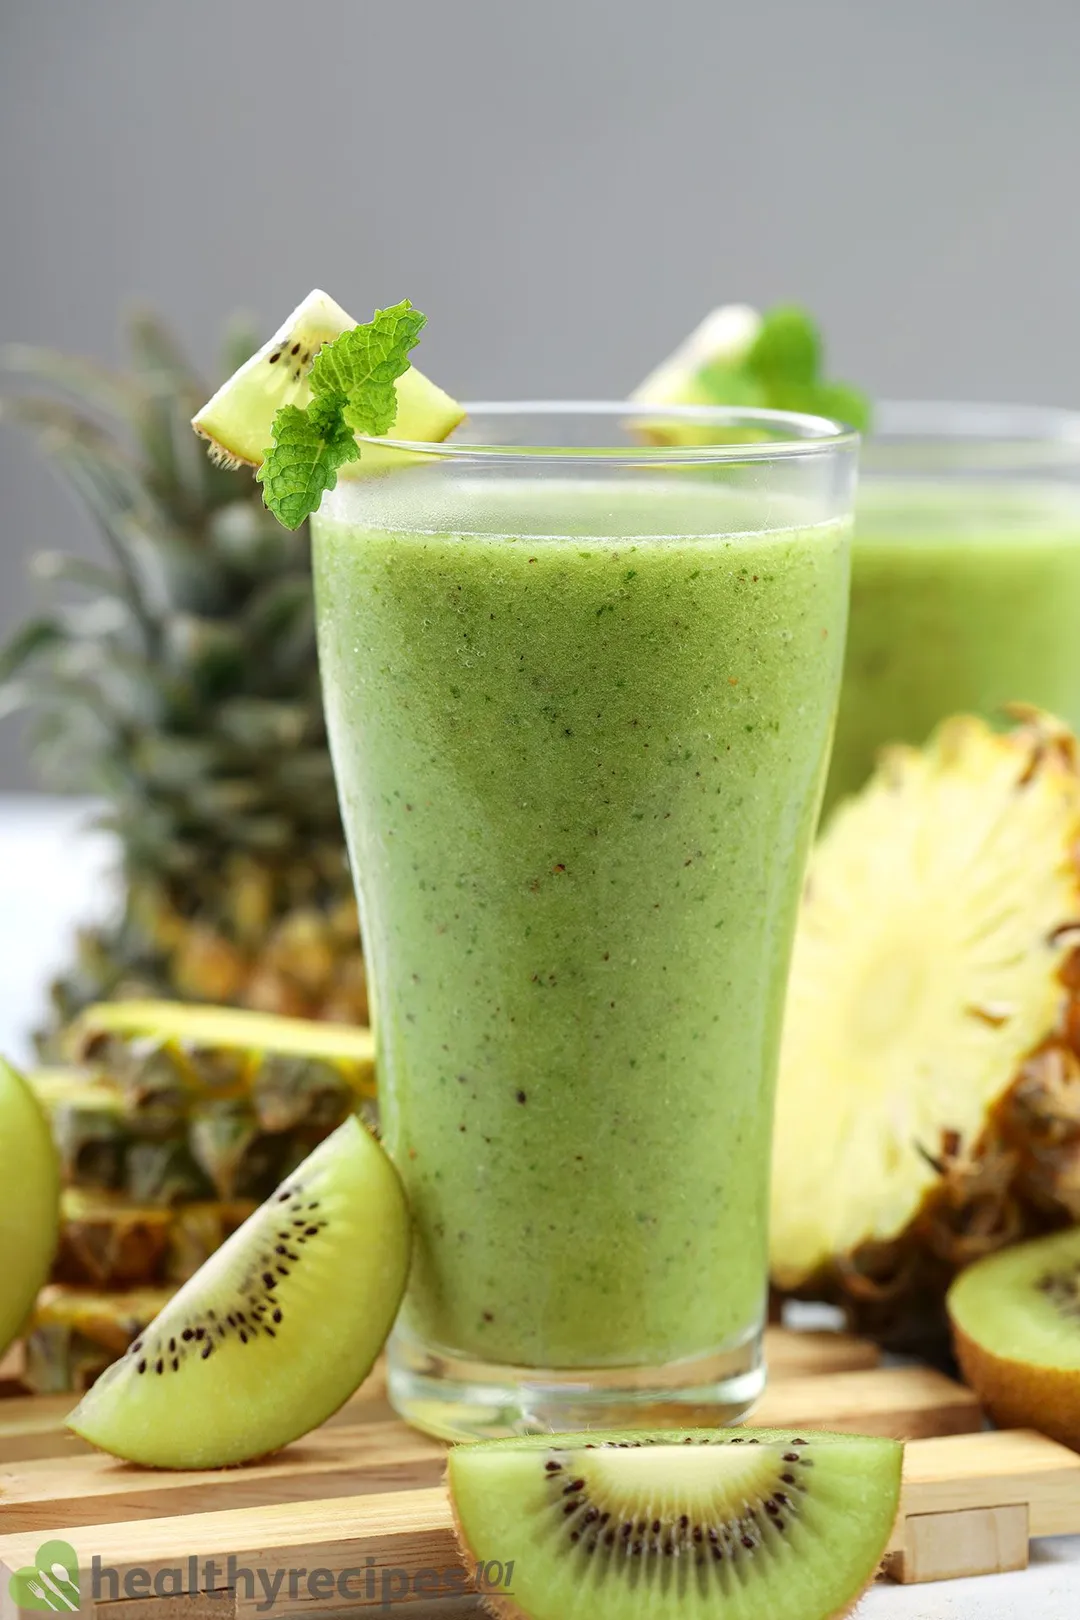 A glass of Pineapple Kiwi Smoothie placed on a wooden planks near green kiwi slices and pineapples.